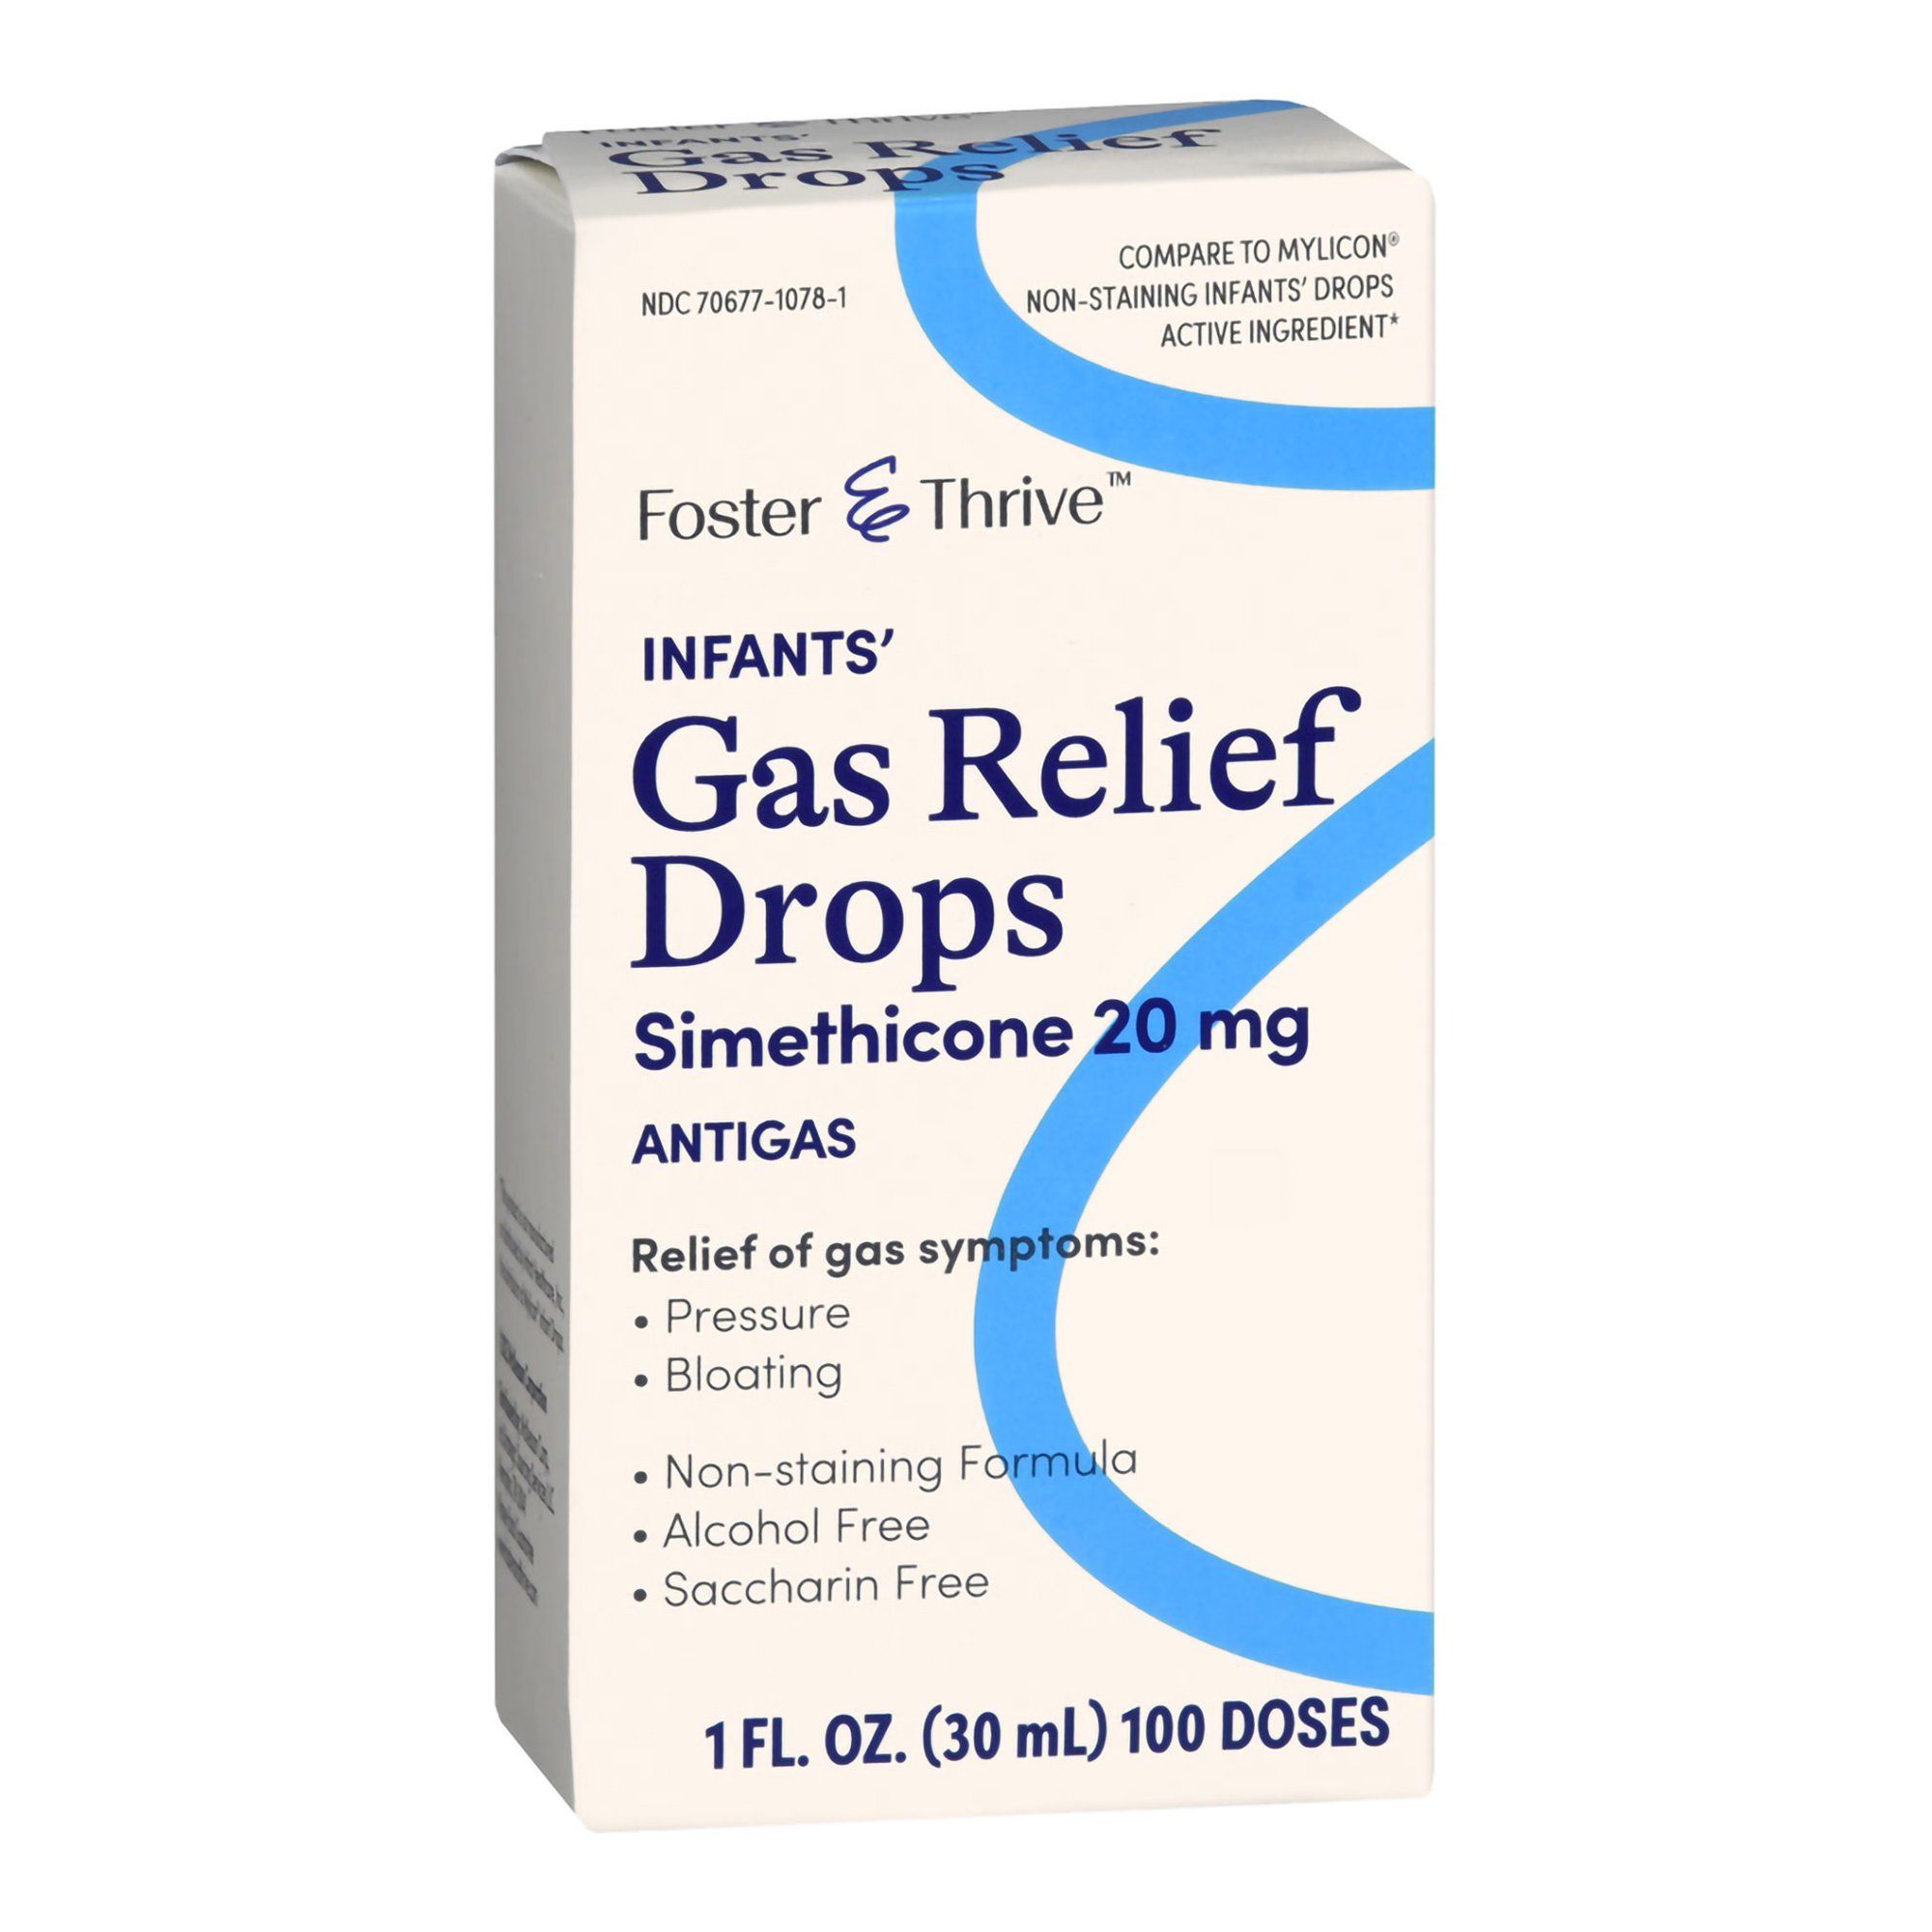 Foster & Thrive Infants' Gas Relief Simethicone Drops, 20 mg - 1 fl oz